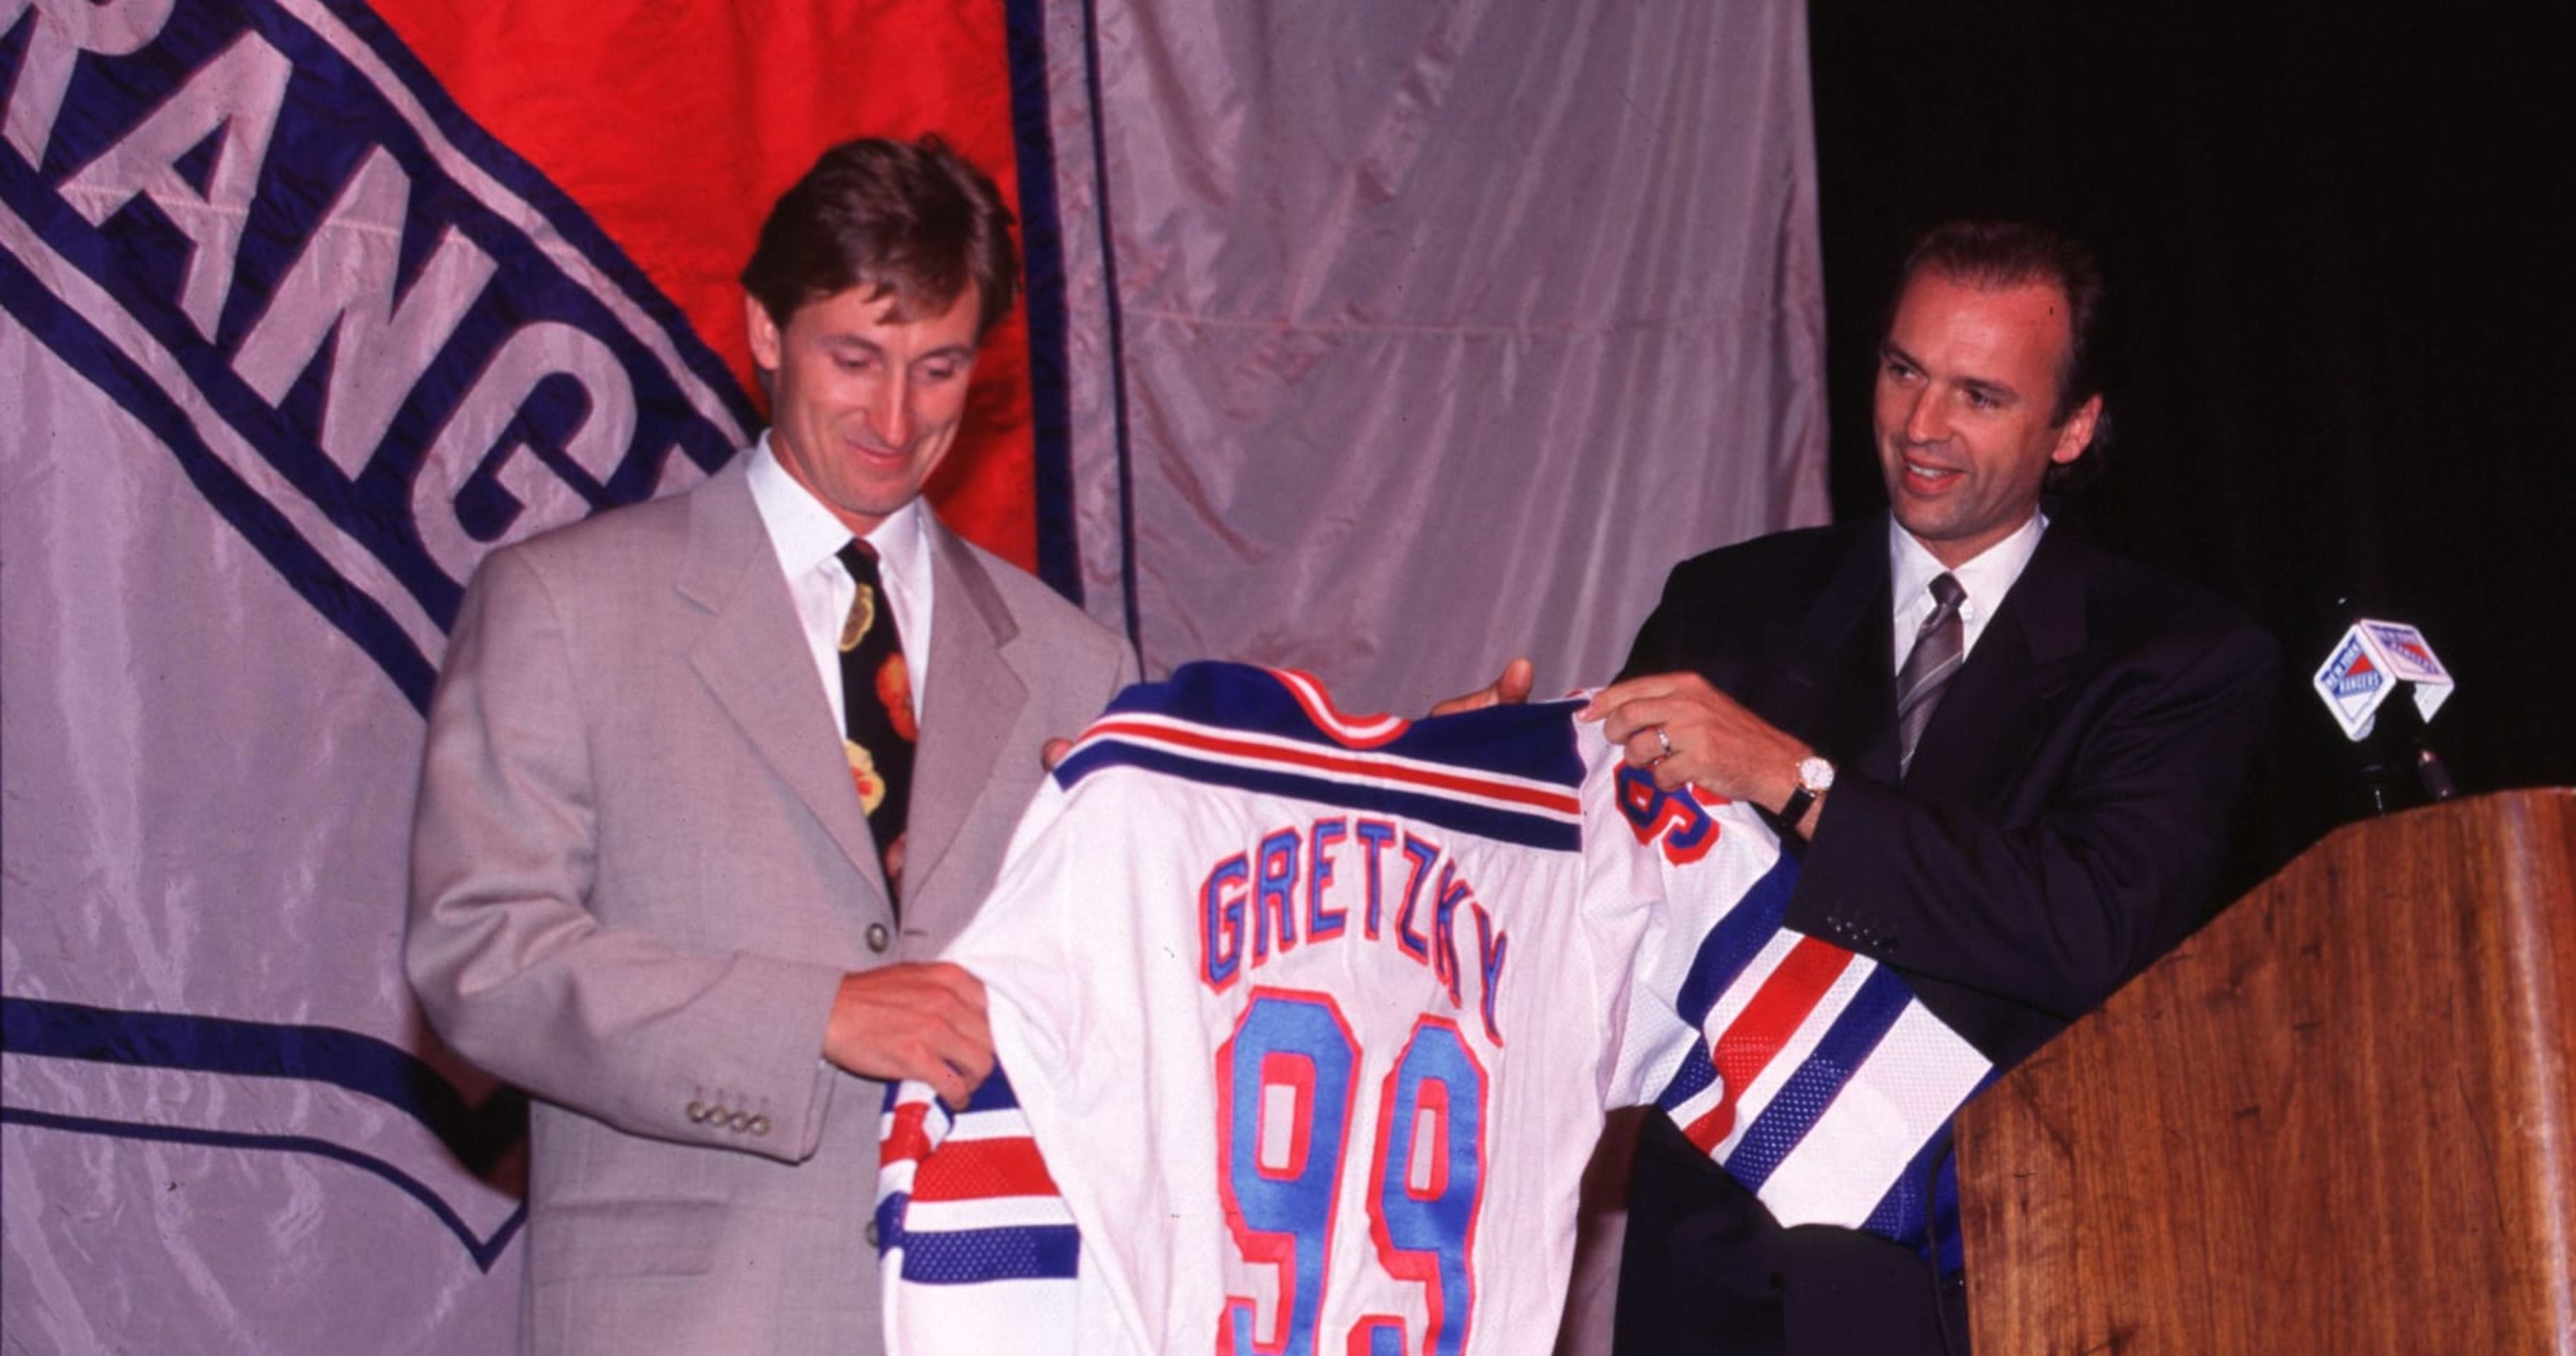 Wayne Gretzky's New York Rangers jersey from his final ever NHL